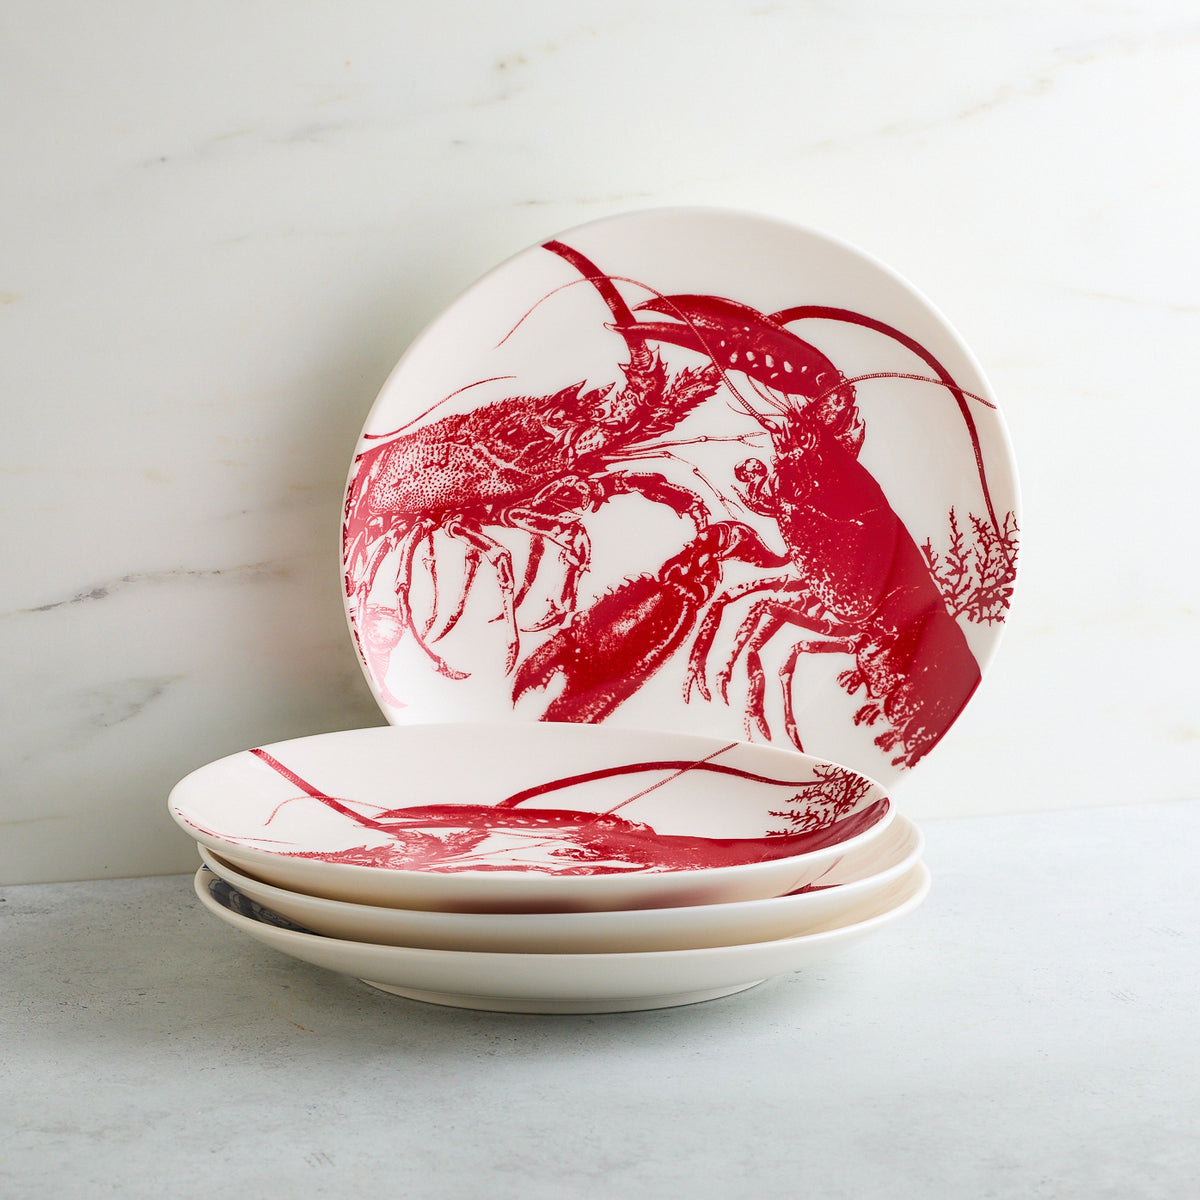 Four Lobster Coupe Salad Plates by Caskata featuring red lobster illustrations are stacked on a light gray surface. One plate is upright, leaning against a white marble backdrop. These premium porcelain plates bring a touch of seaside style to your dining experience.